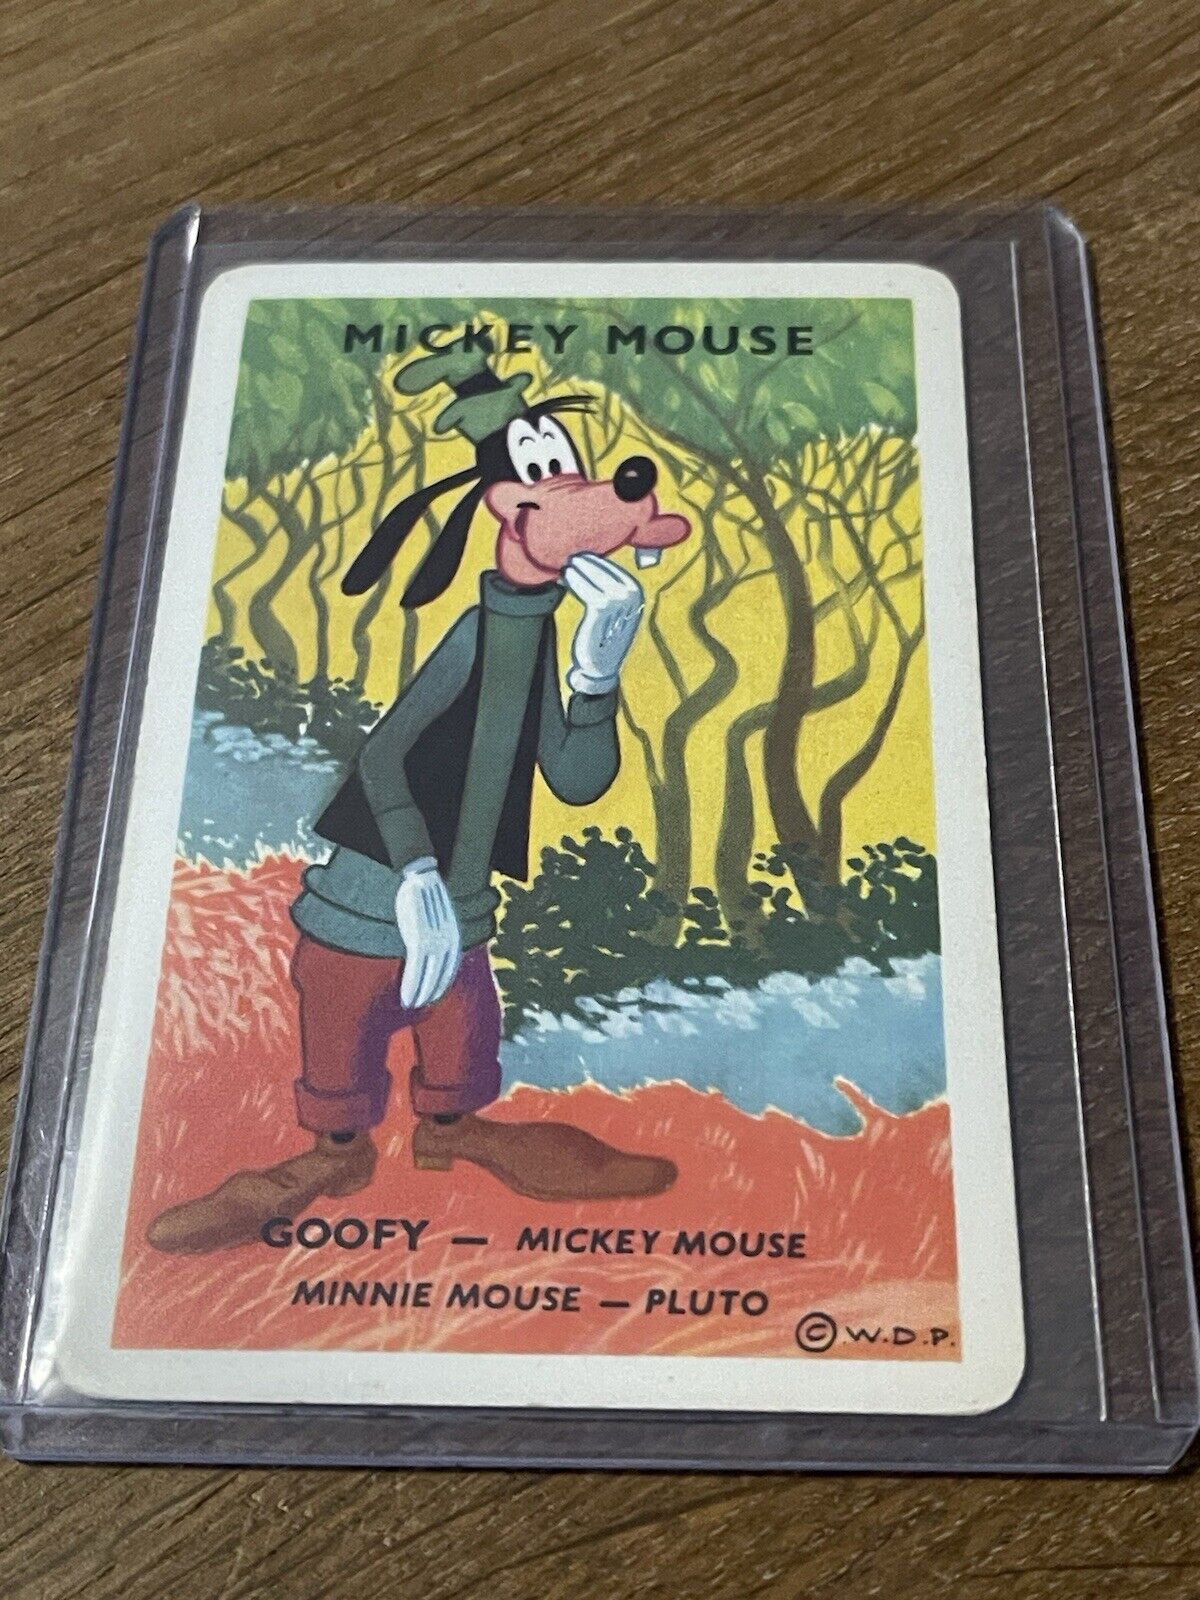 Vintage Rare French Disney 🎥 Card Game Goofy Playing Card RARE